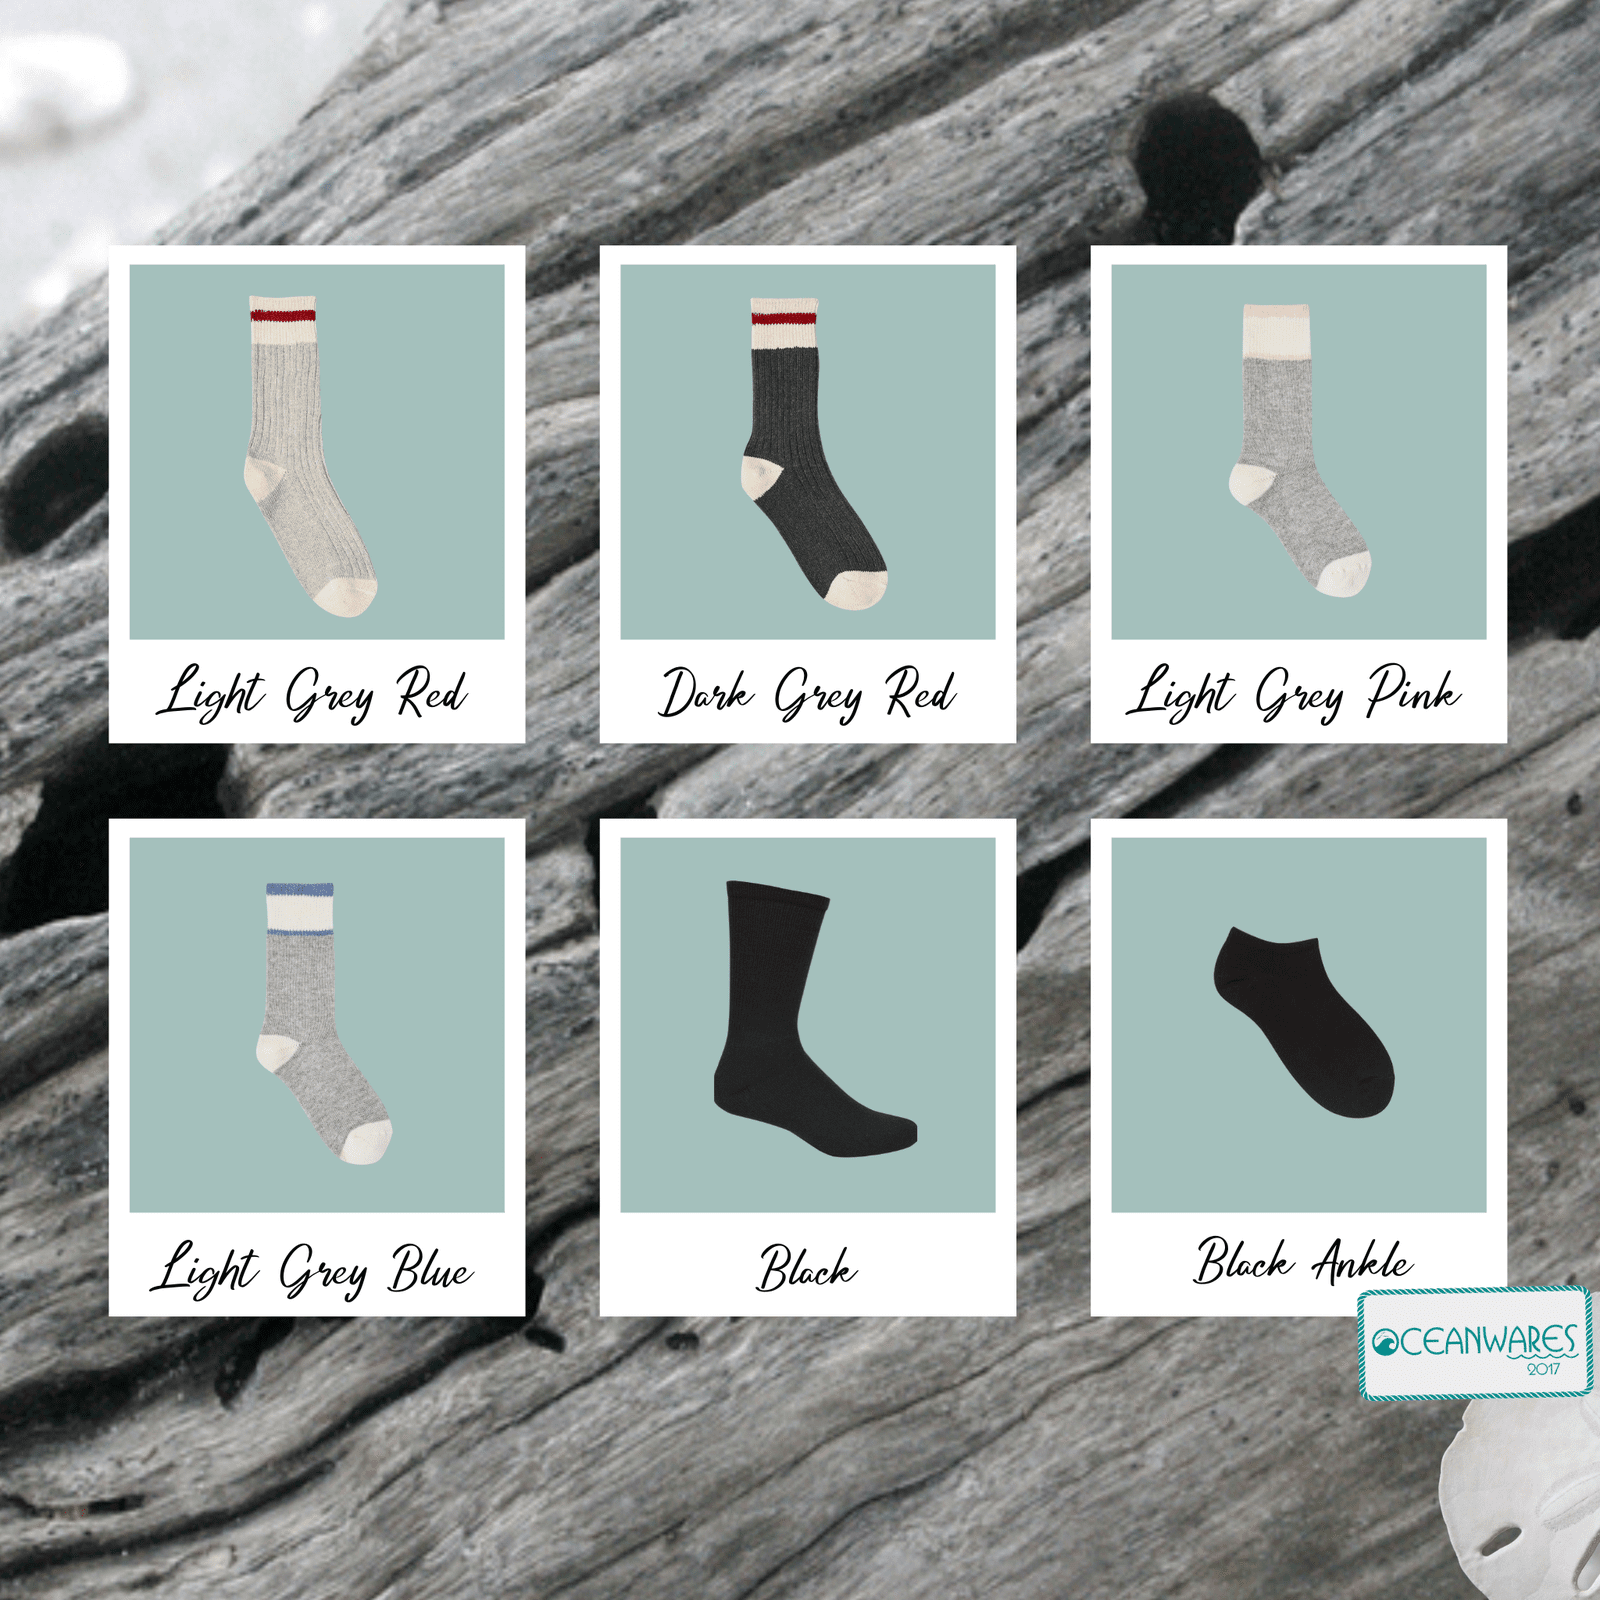 East Coast Syle Puffin, SUPER SOFT NOVELTY WORD SOCKS.